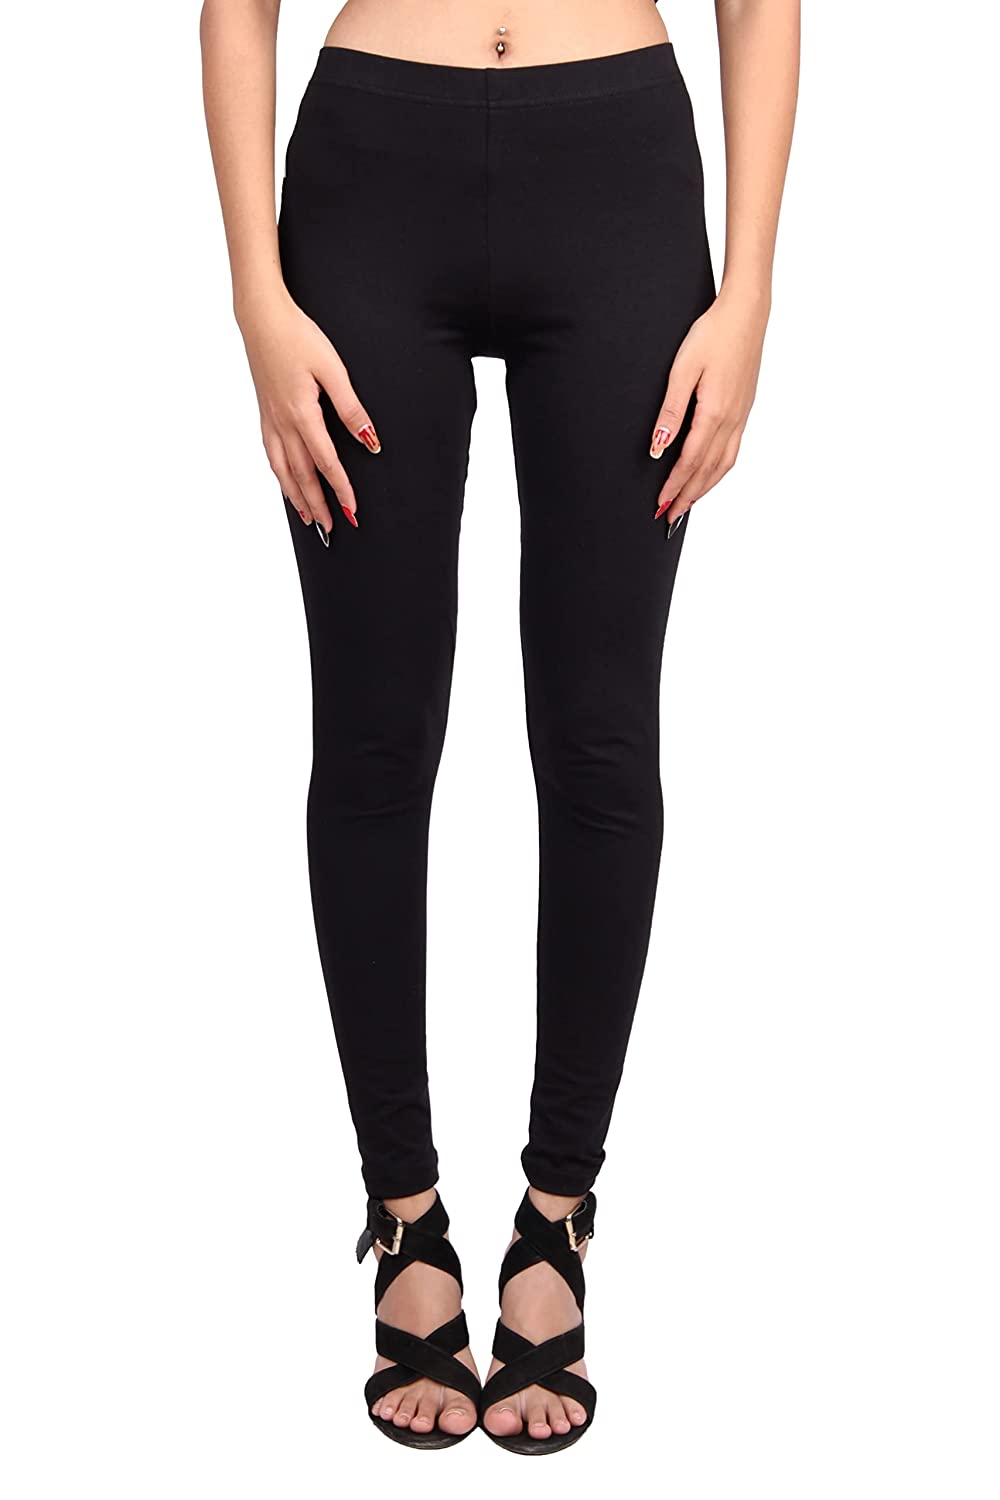 Branded Leggings Manufacturers In Mumbai India | International Society of  Precision Agriculture